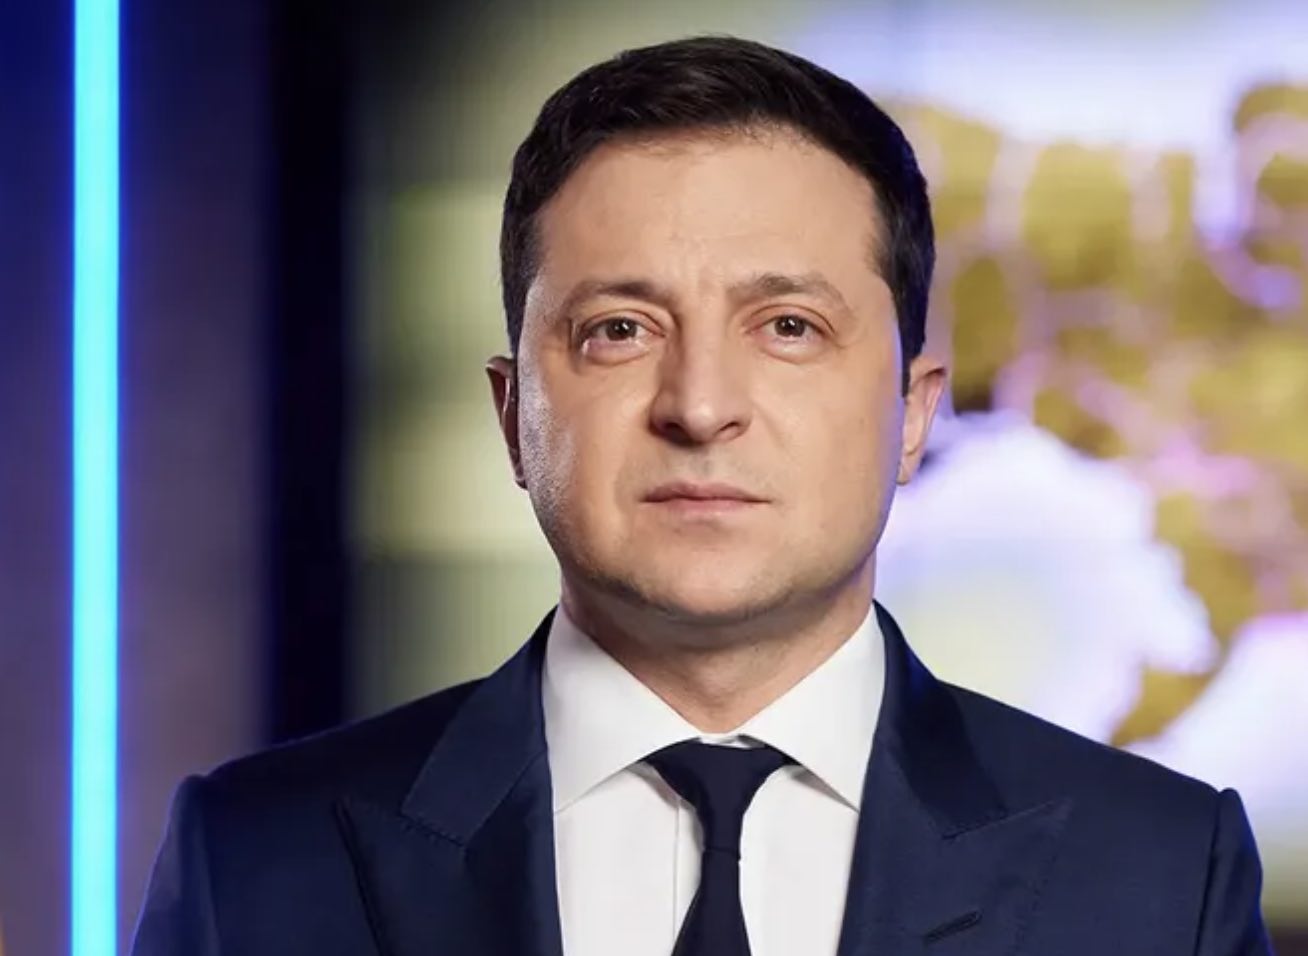 Featured image for “SALON; WHY ZELENSKY’S BACKGROUND AS A STAND-UP MATTERS.”